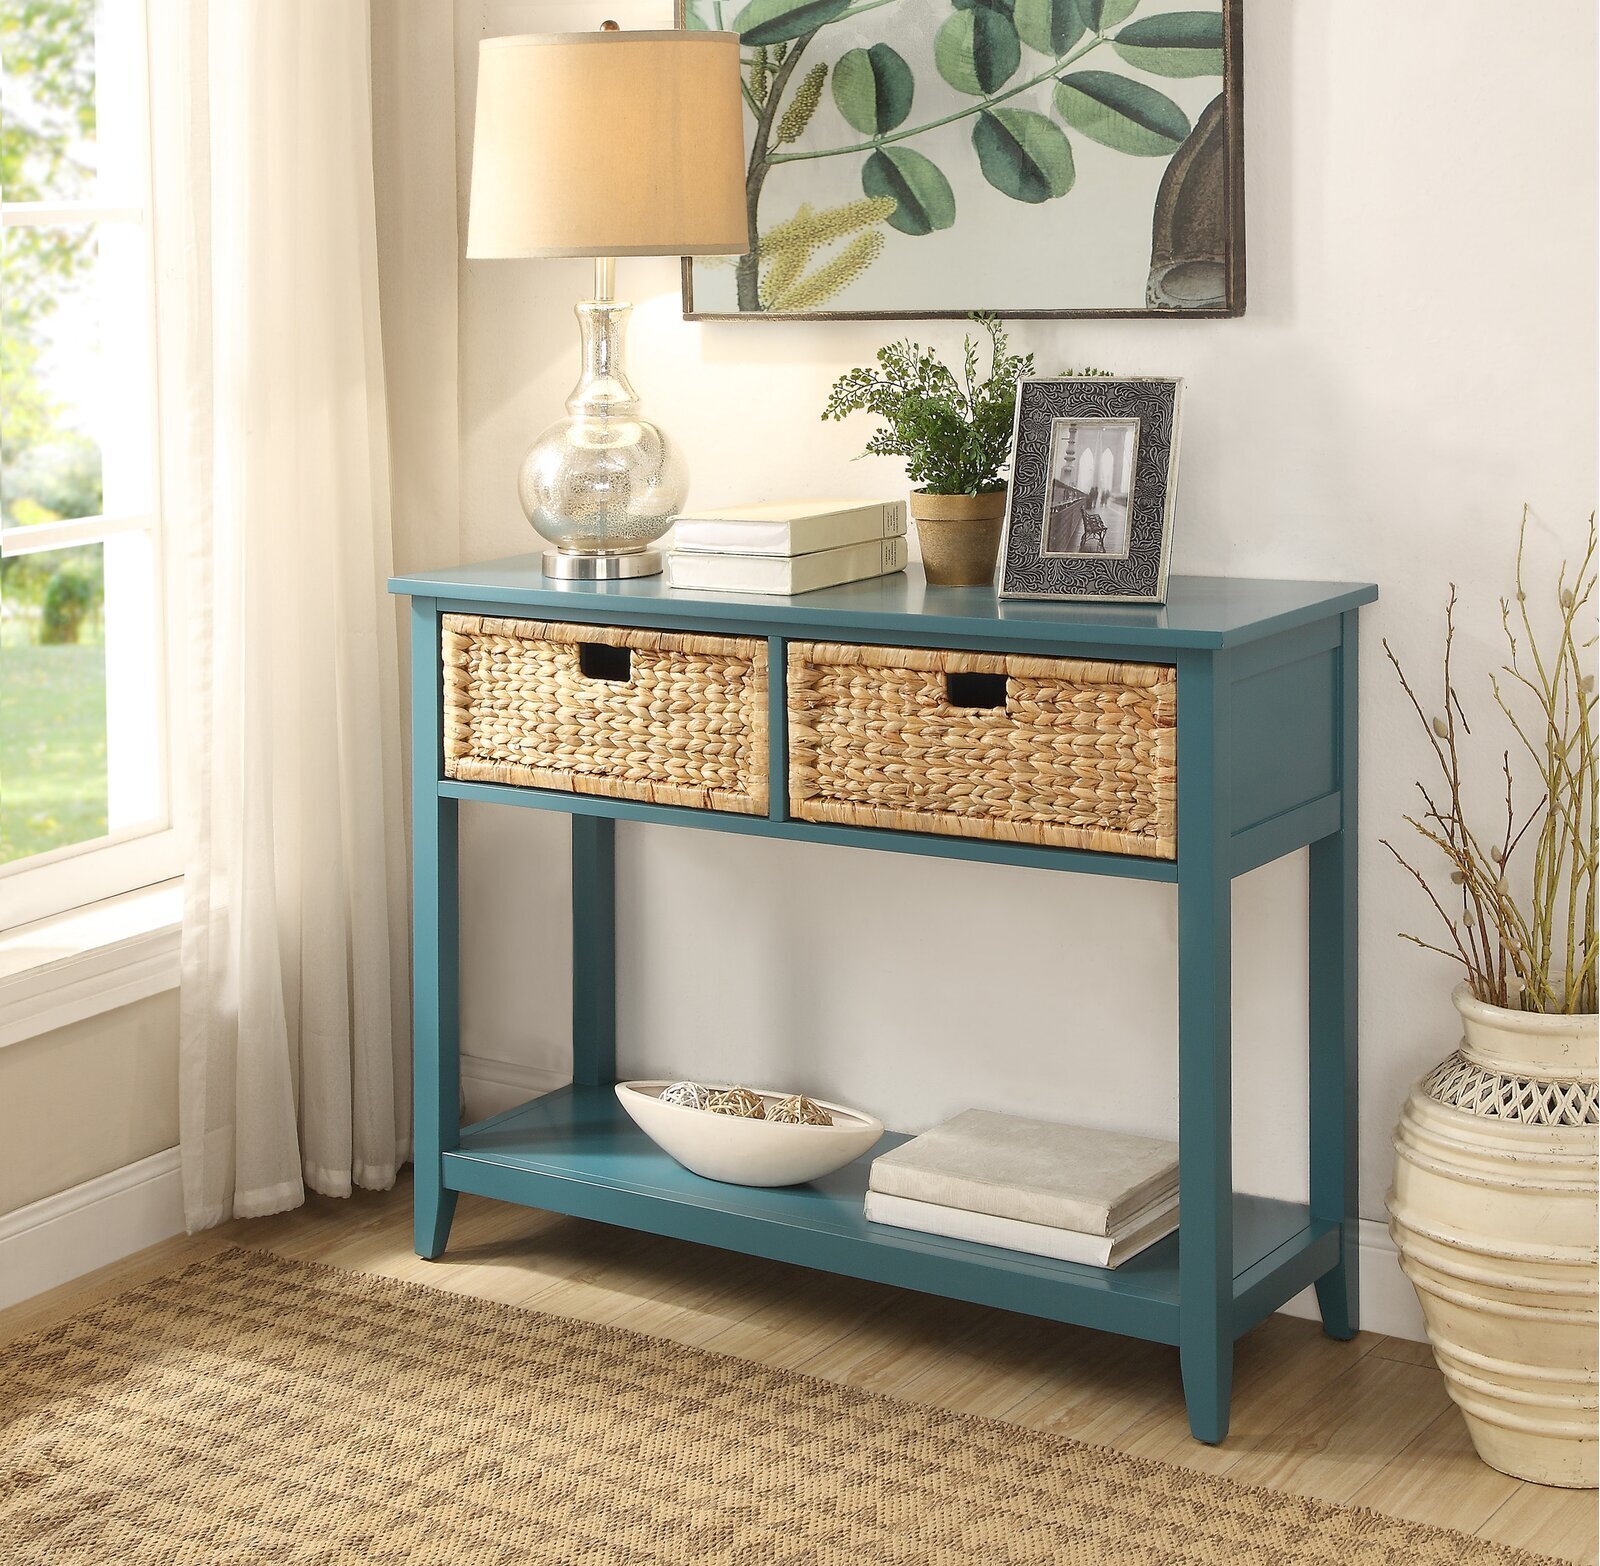 Teal Solid Wood Table With Baskets Underneath 